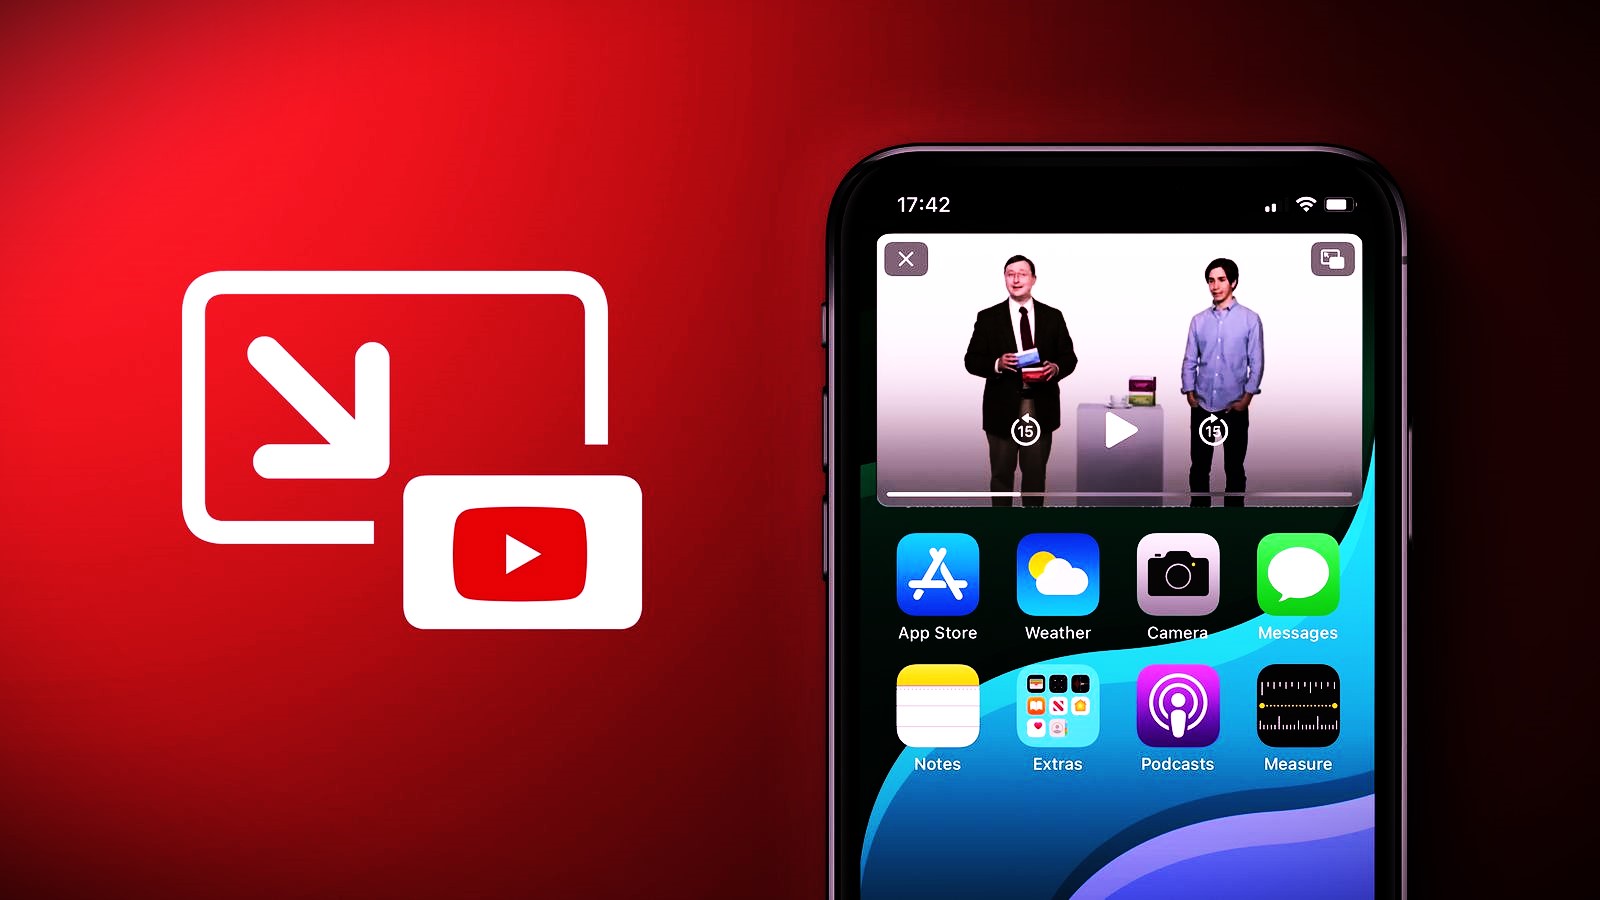 YouTube PiP (Picture-in-Picture) Nedir?